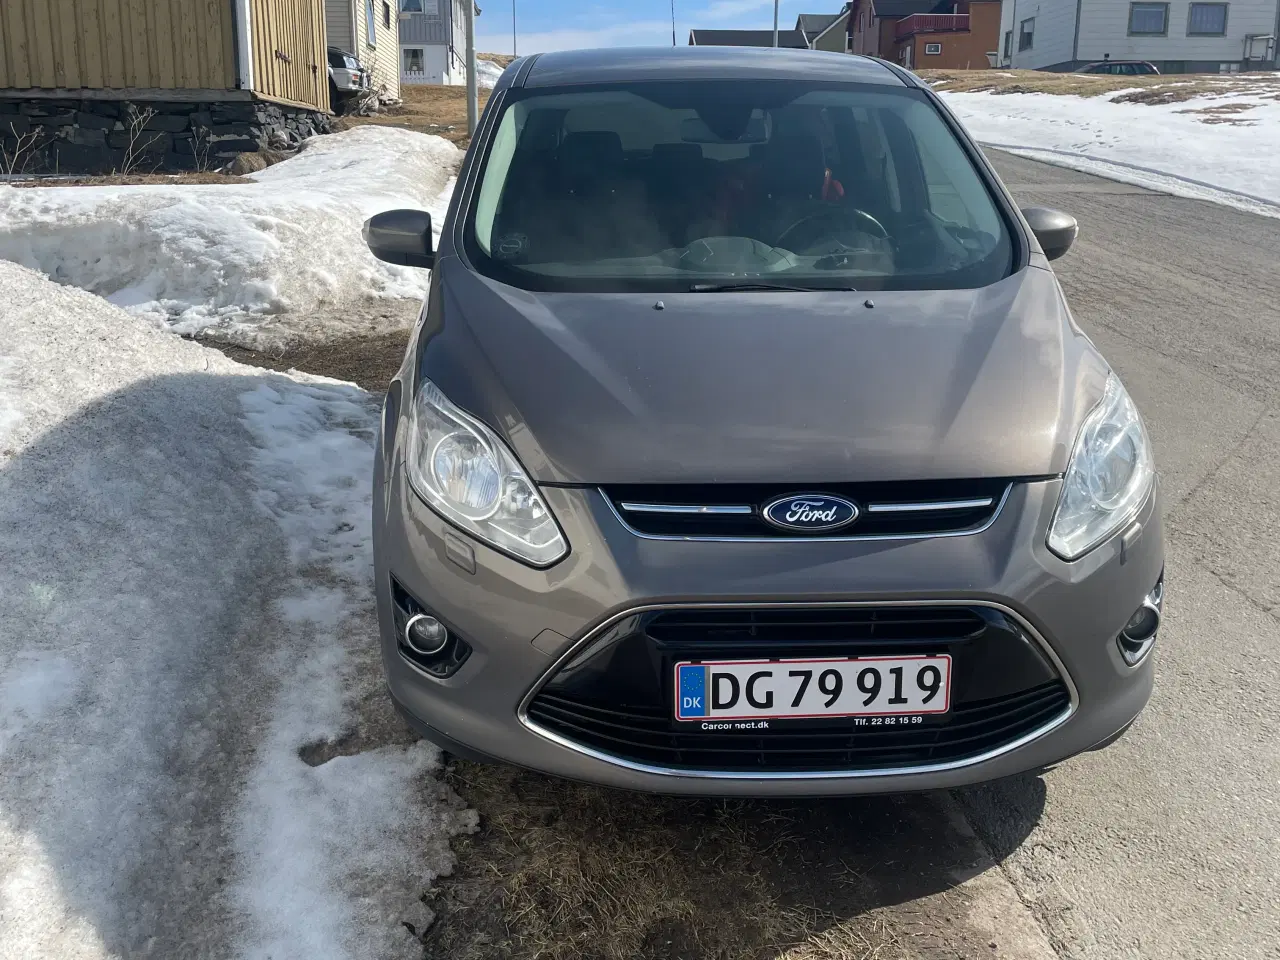 Billede 6 - ford c-max 2.0 automat